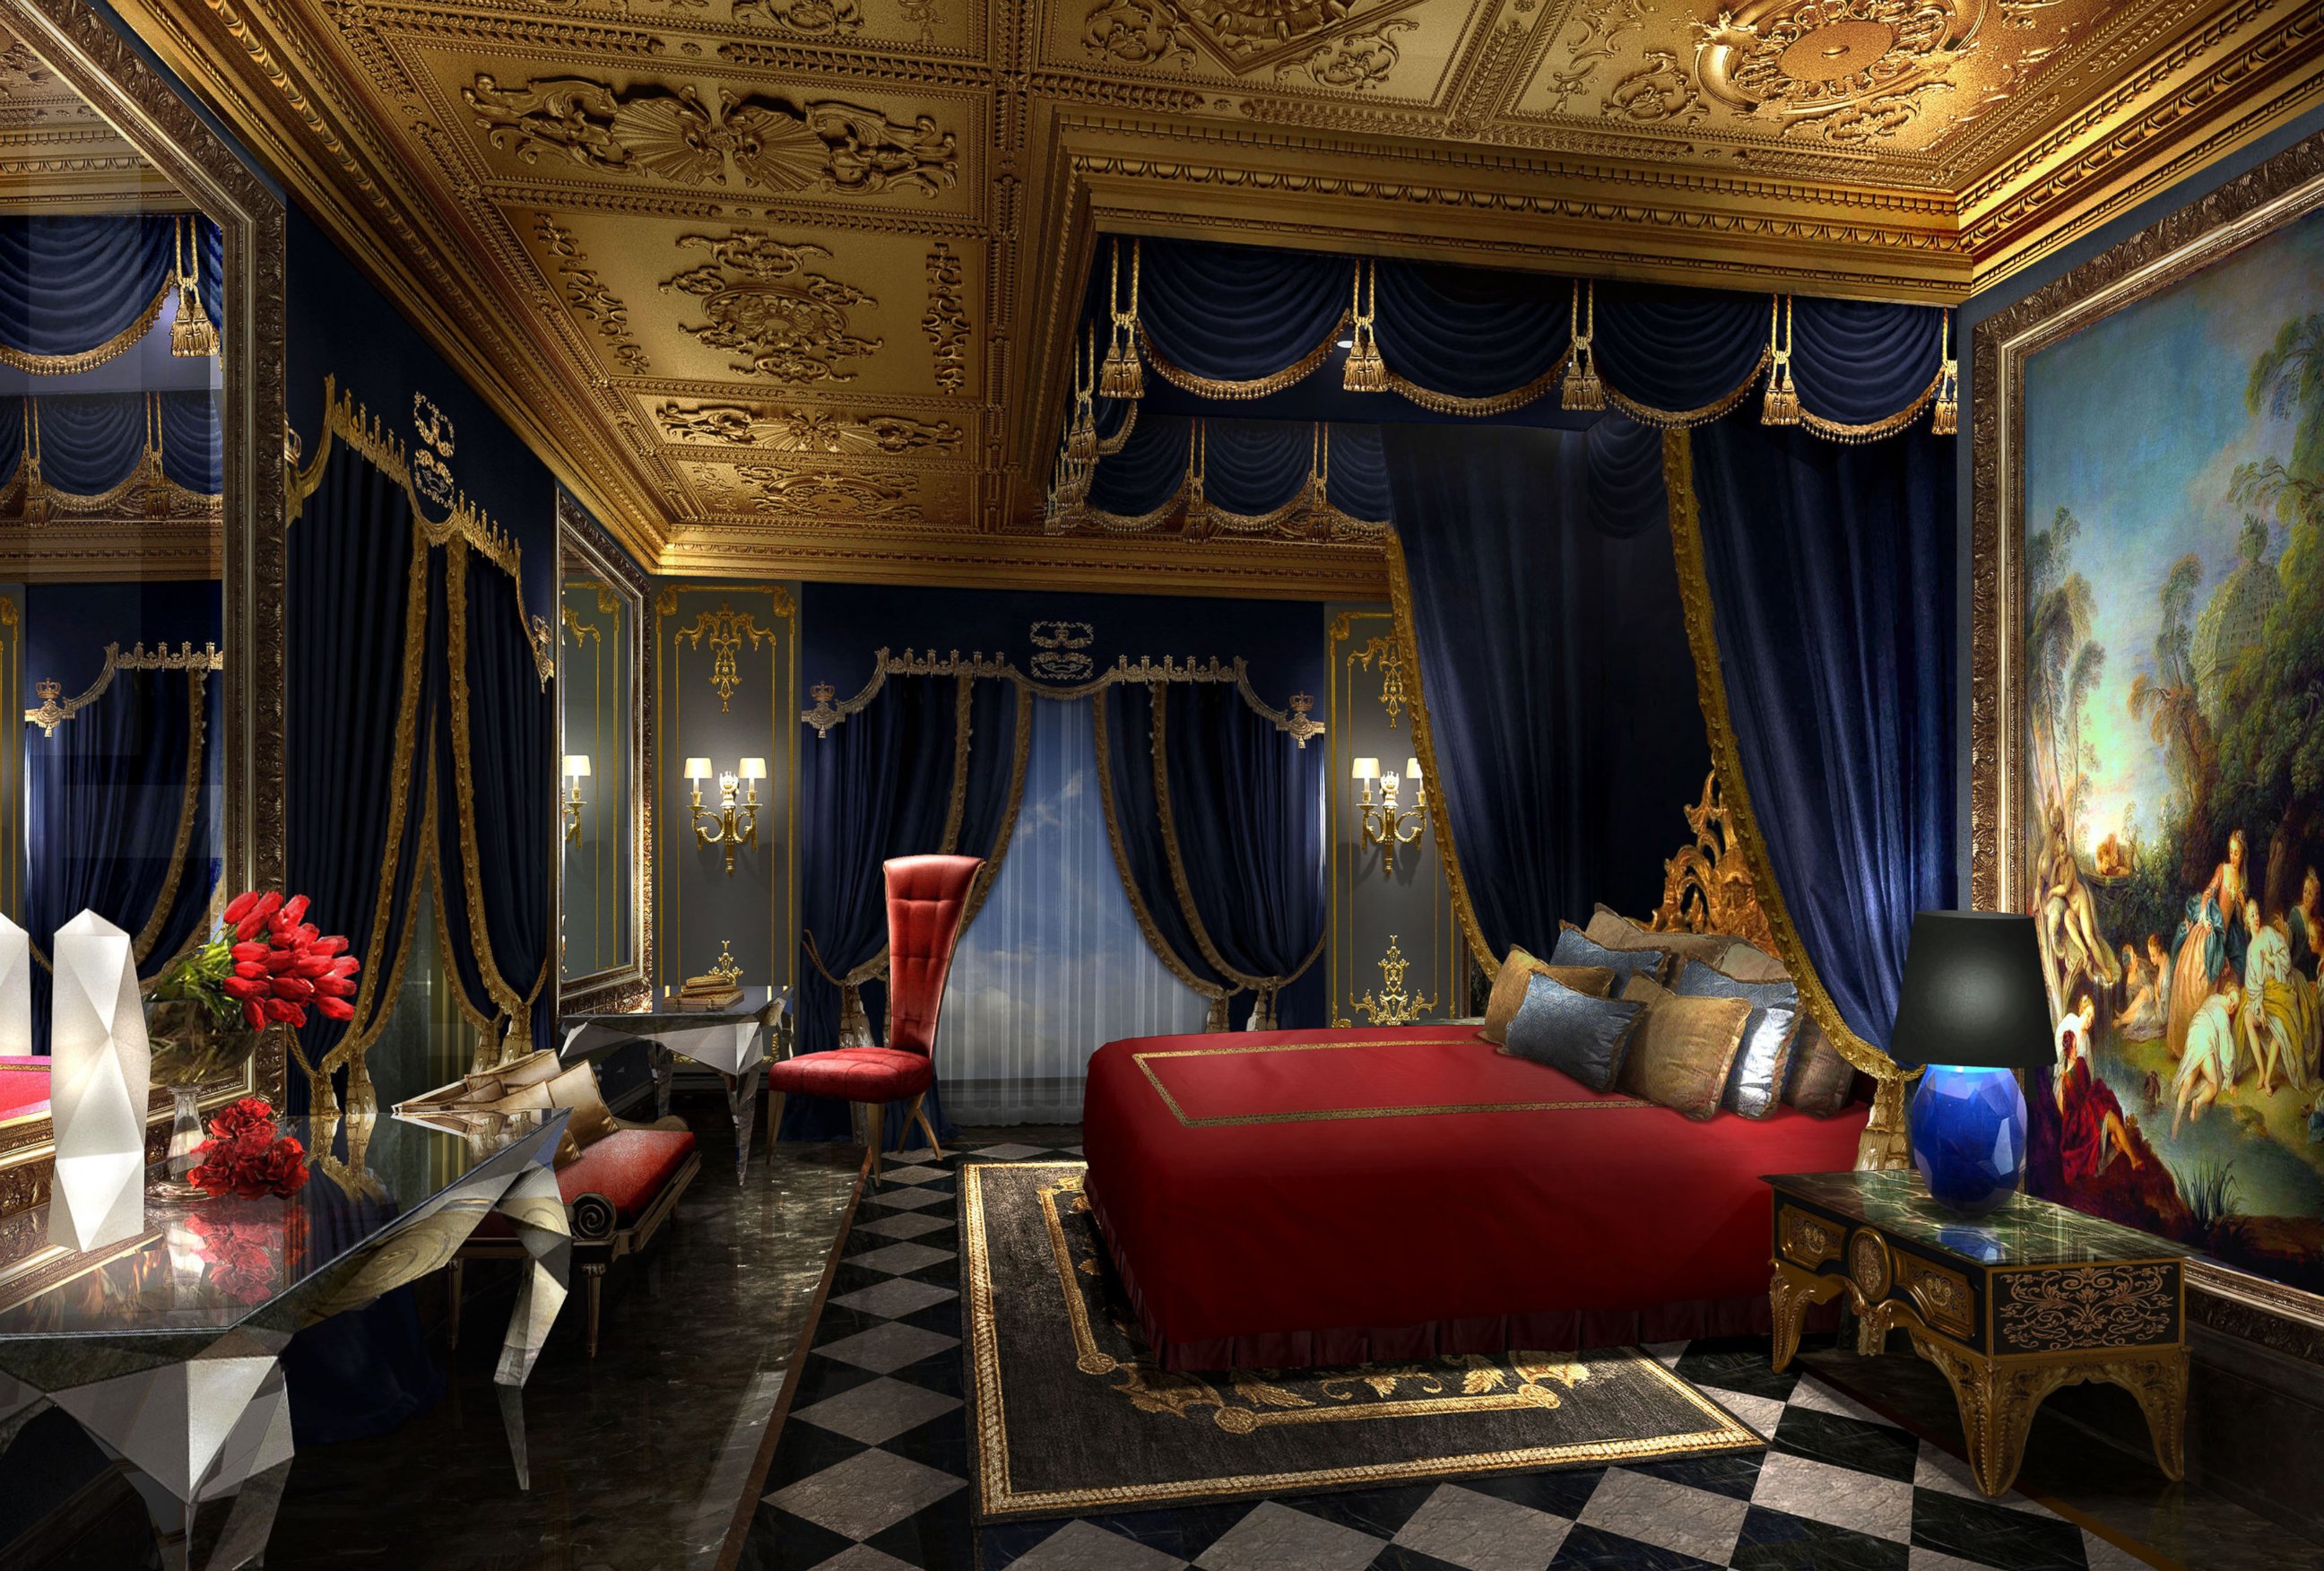 PHOTO: A bedroom in The 13 Hotel offers a king-sized bed and furniture inspired by the Baroque period.